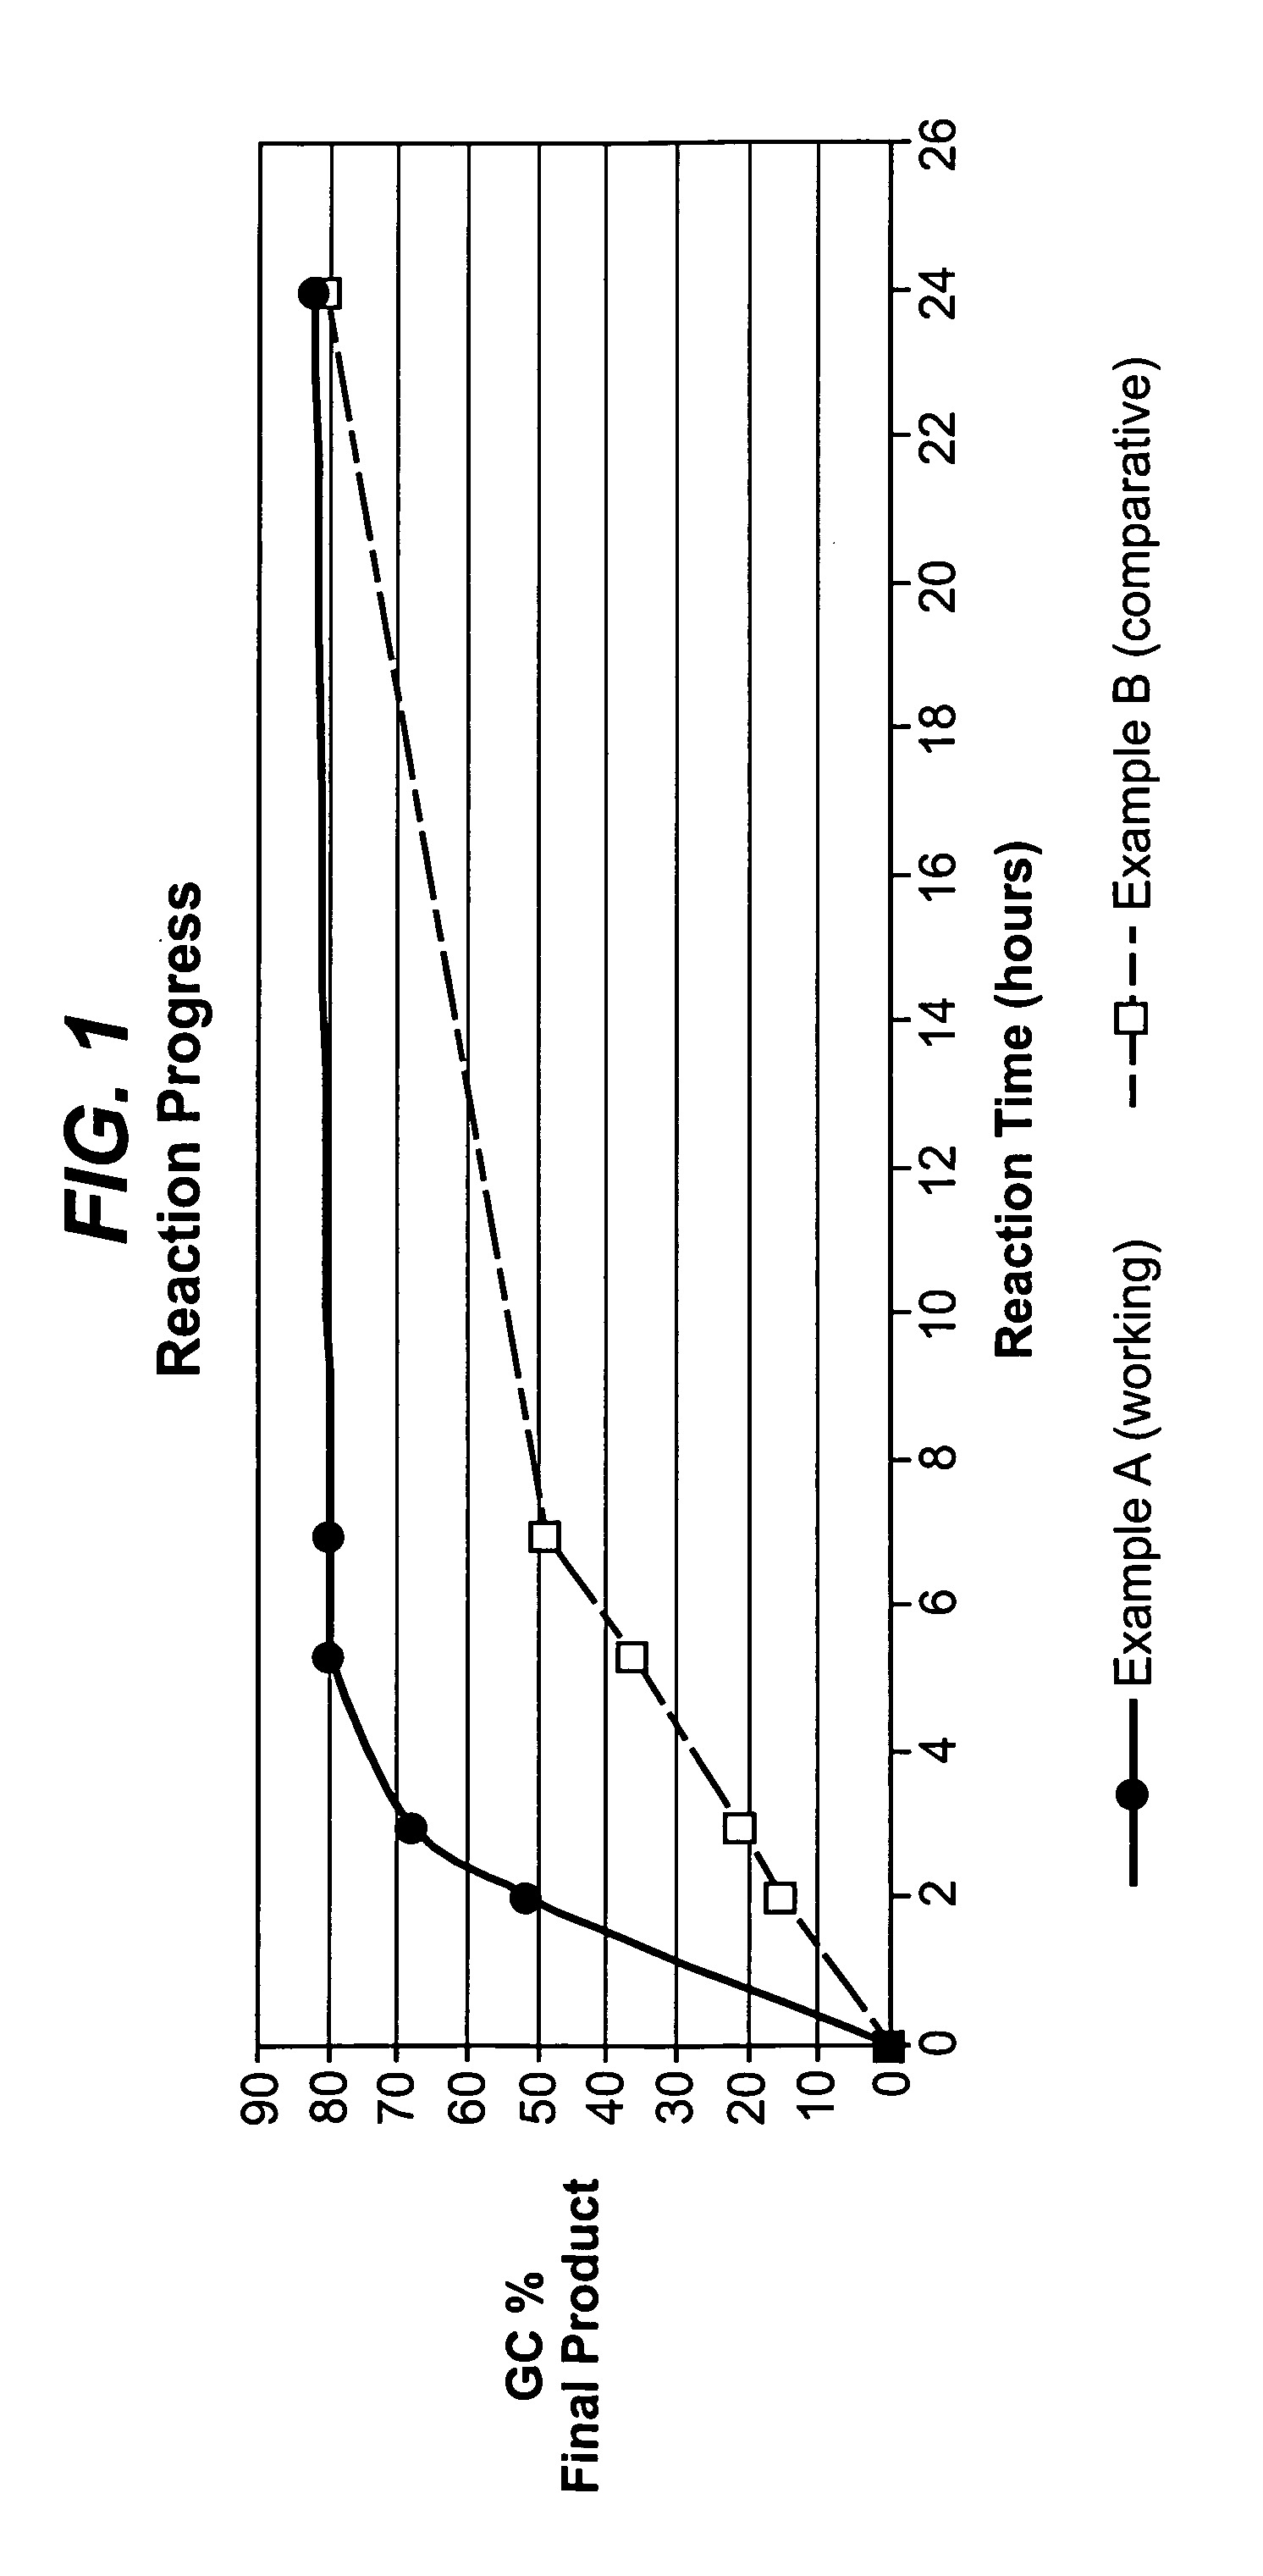 Process for producing nitroalcohols